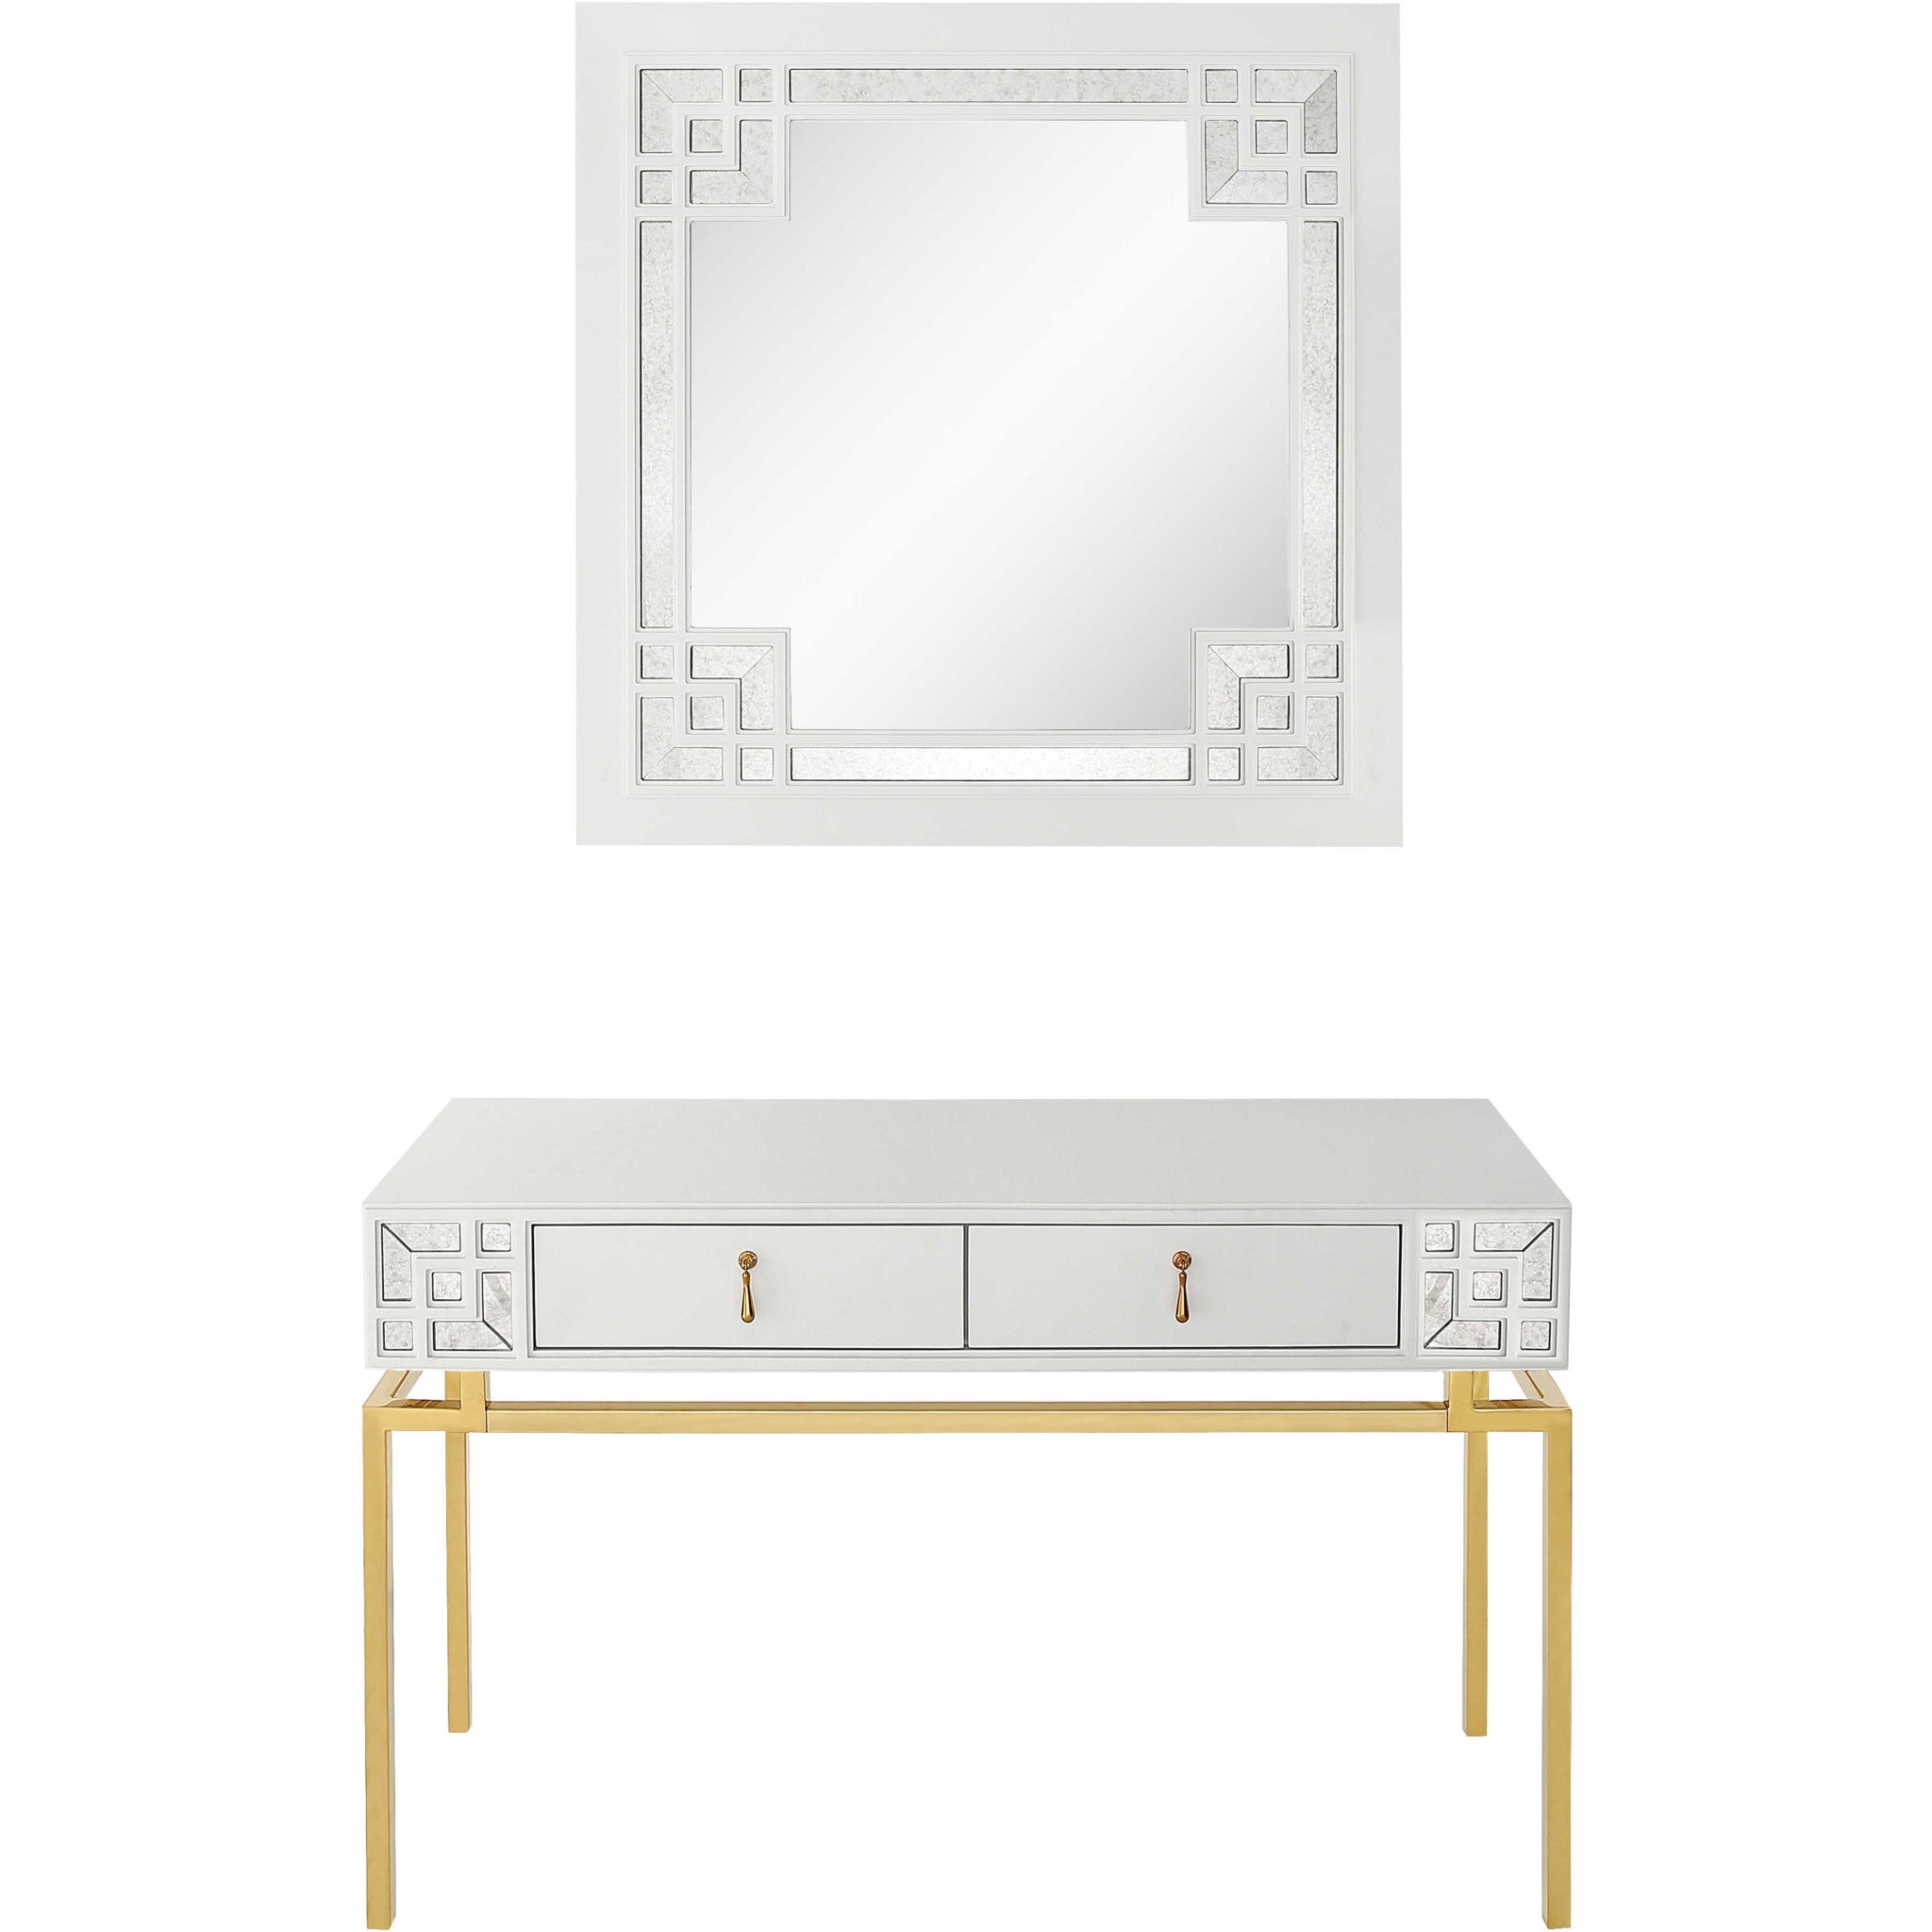 Set of Two 47" White and Gold Wood and Manufactured Wood Blend Mirrored Console Table And Drawers